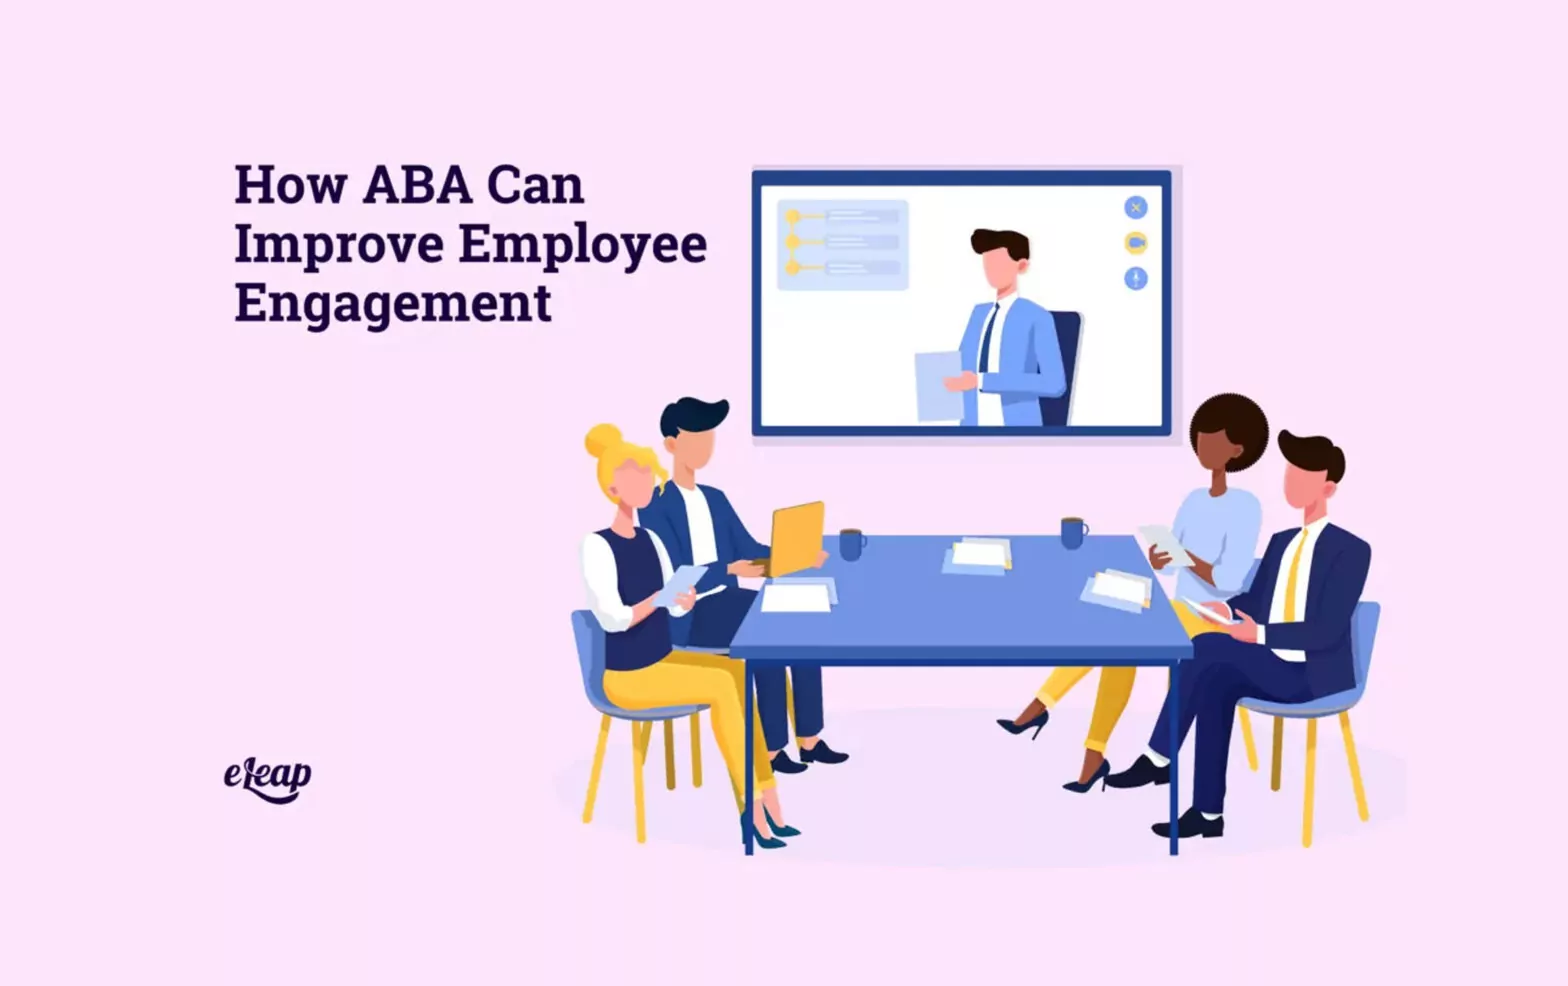 How ABA Can Improve Employee Engagement